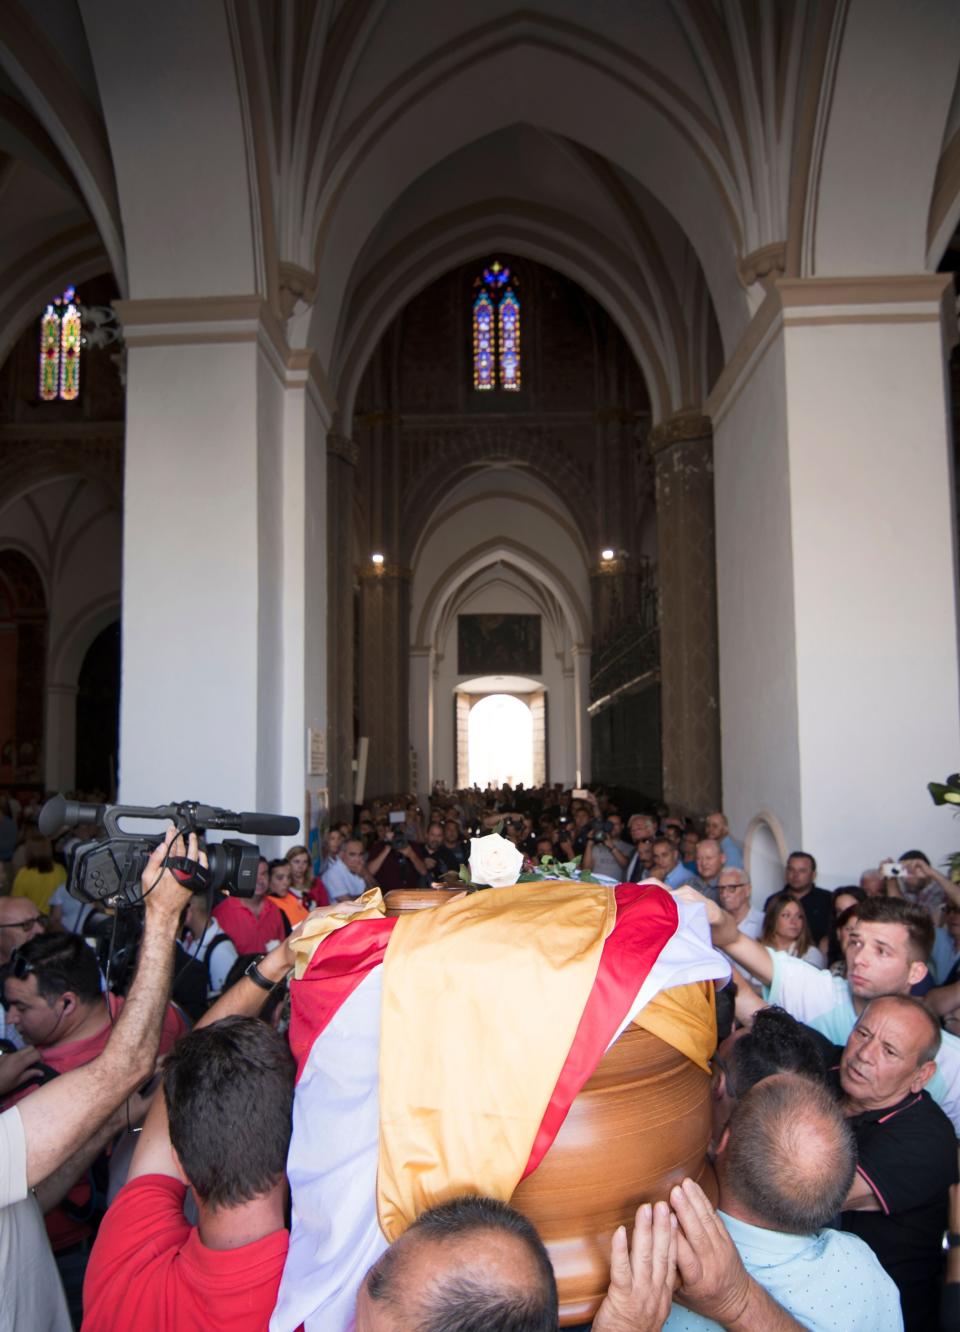 The coffin with the remains of Spanish football player Jose Antonio Reyes, covered with the flags of the village of Utrera and Sevilla FC football team, is carried on shoulders to the Santa Maria de Mesa church in Utrera, during the funeral for the footballer on June 3, 2019. - Former Arsenal, Real Madrid and Spain forward, Jose Antonio Reyes, 35, was killed in a car crash on June 1, 2019. Reyes shot to fame at Sevilla and secured a switch to Arsenal, where he was part of the unbeaten 'Invincibles' 2003-2004 Premier League winners, before spells at Real and Atletico Madrid. (Photo by CRISTINA QUICLER / AFP)        (Photo credit should read CRISTINA QUICLER/AFP/Getty Images)